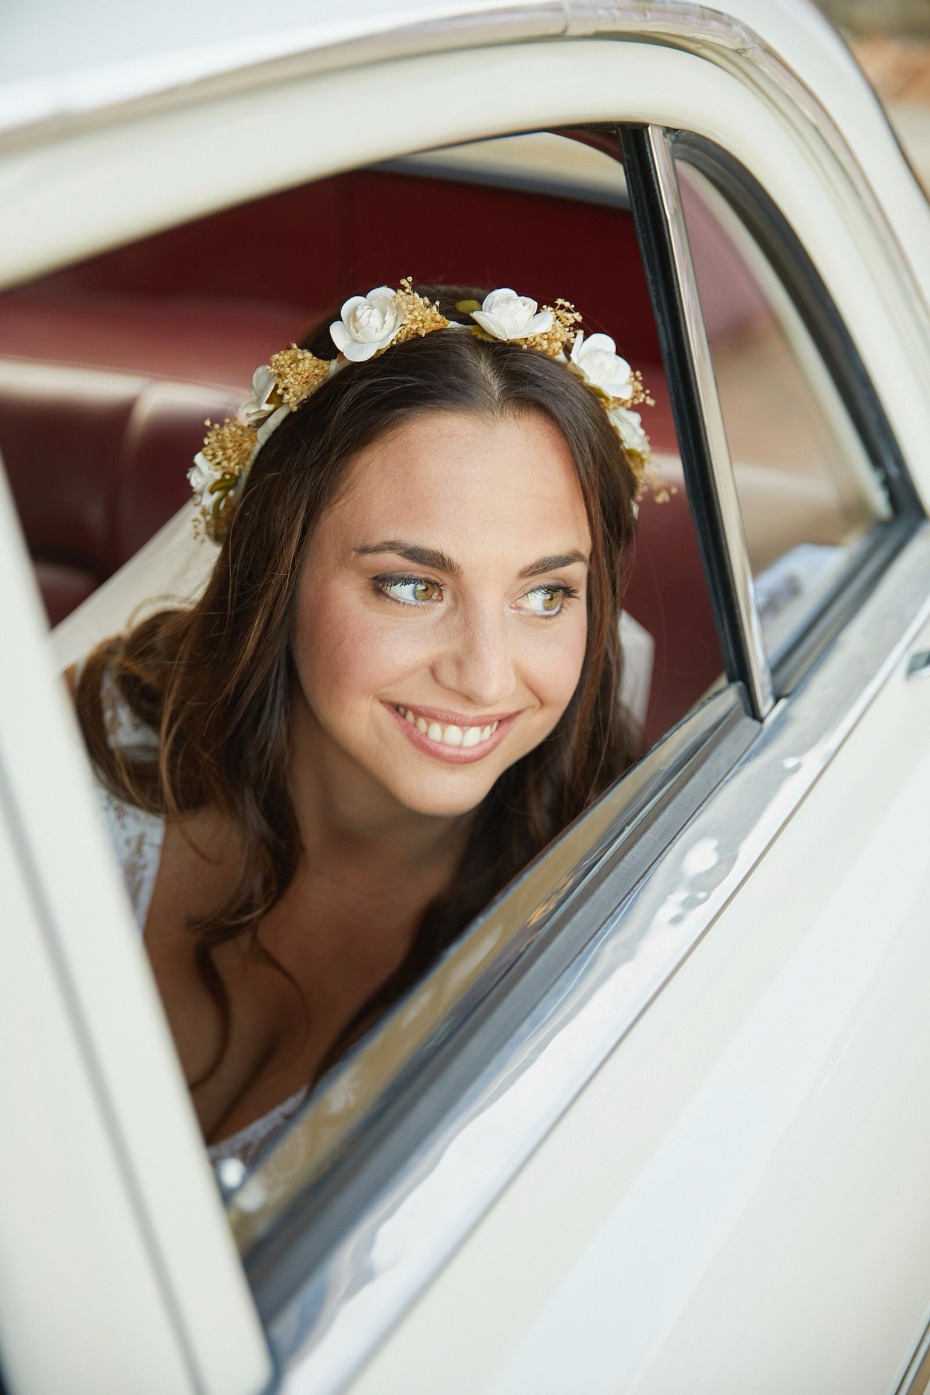 here comes the bride riding in vintage style